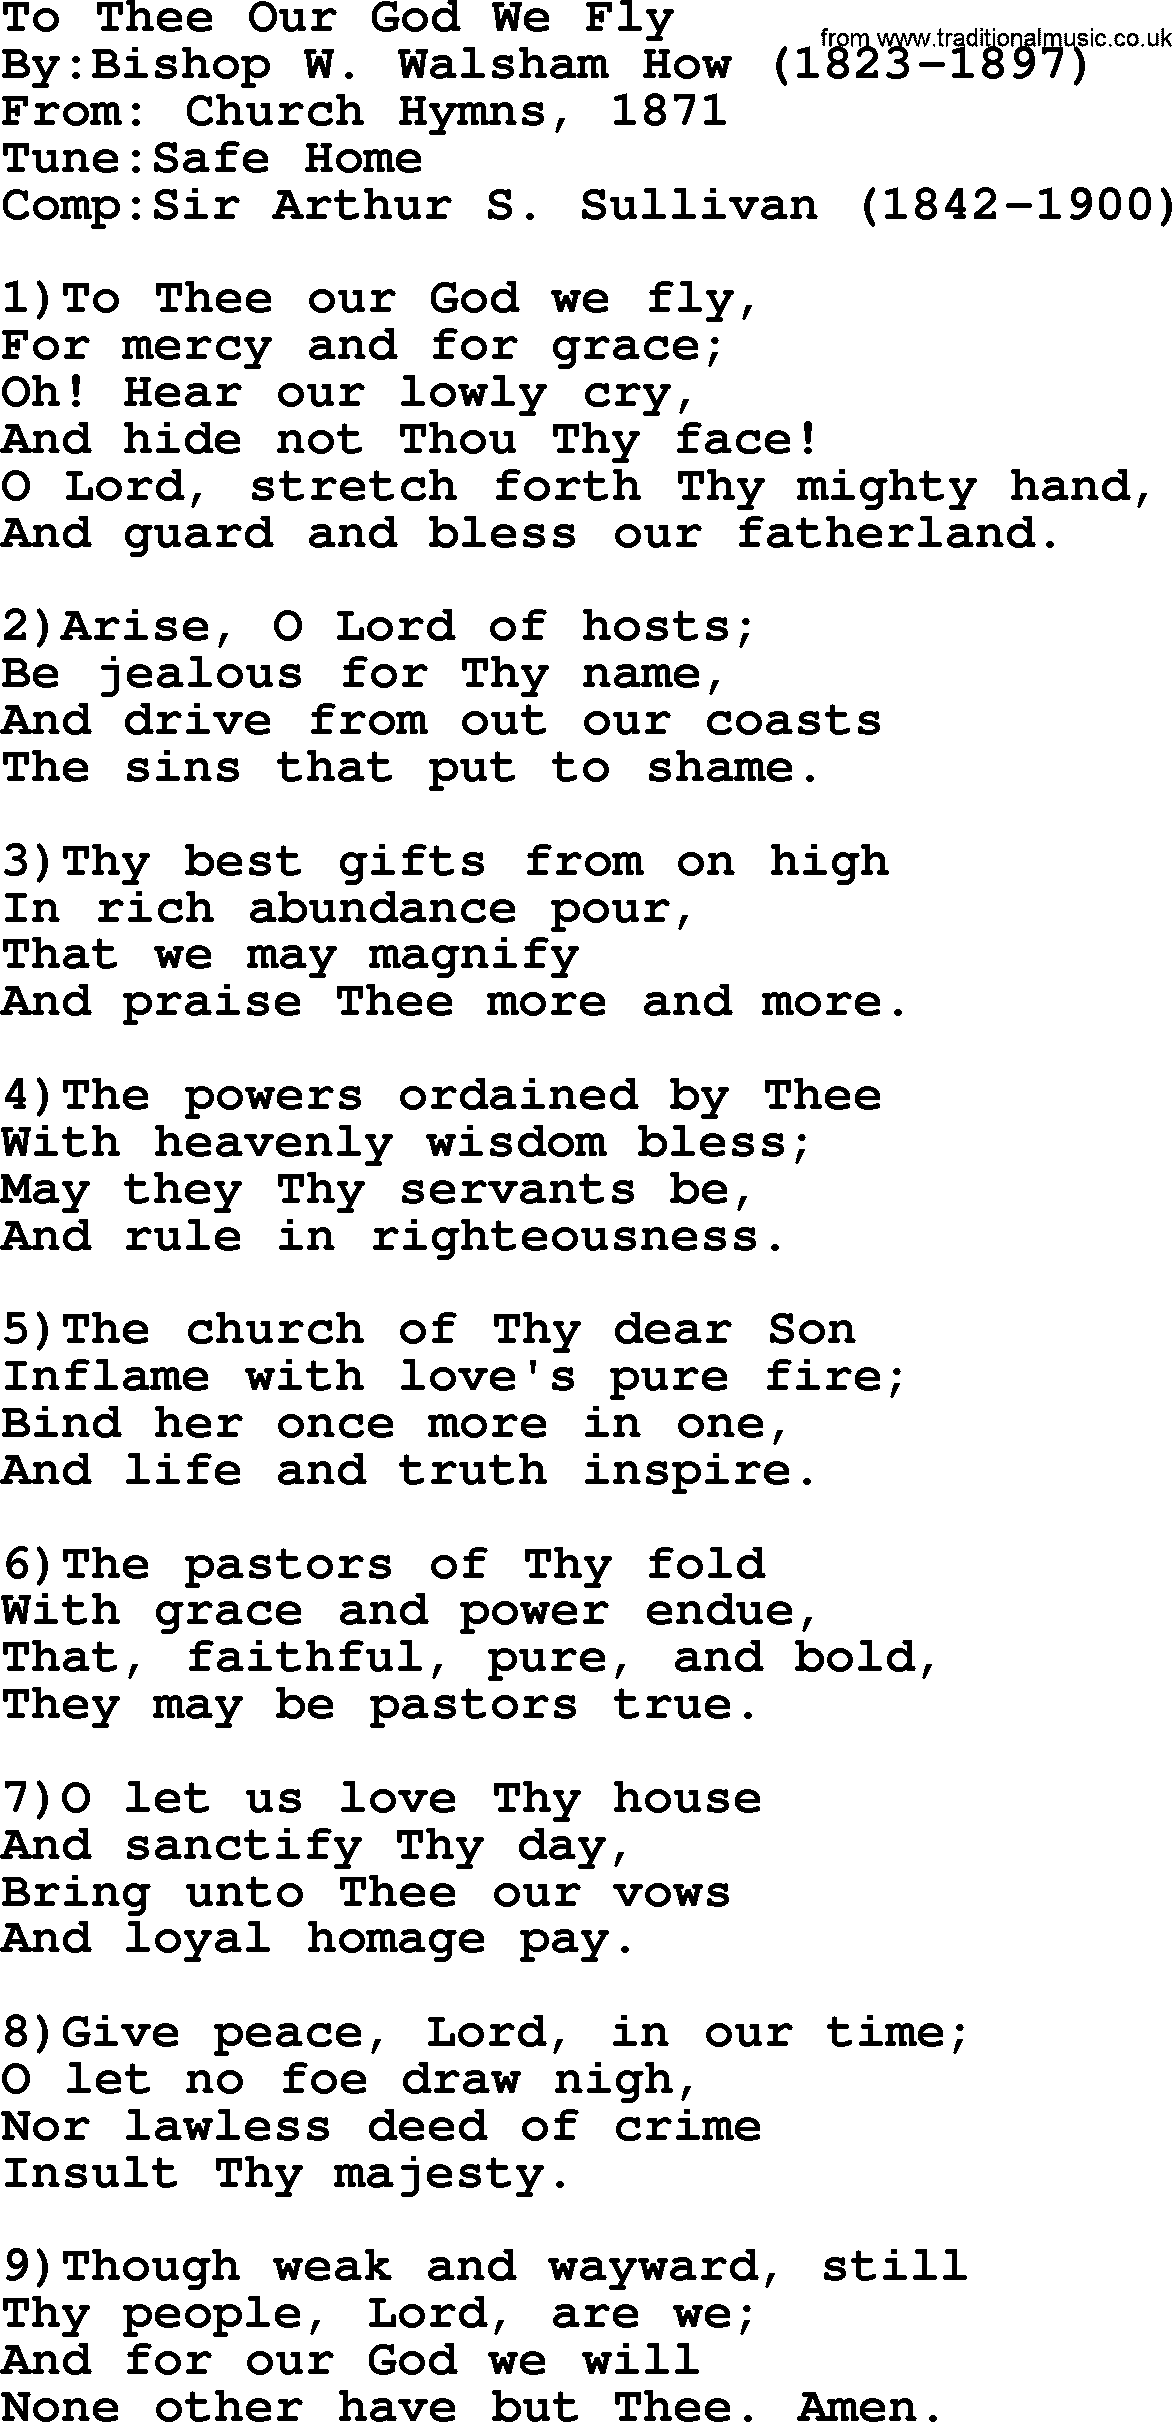 Methodist Hymn: To Thee Our God We Fly, lyrics